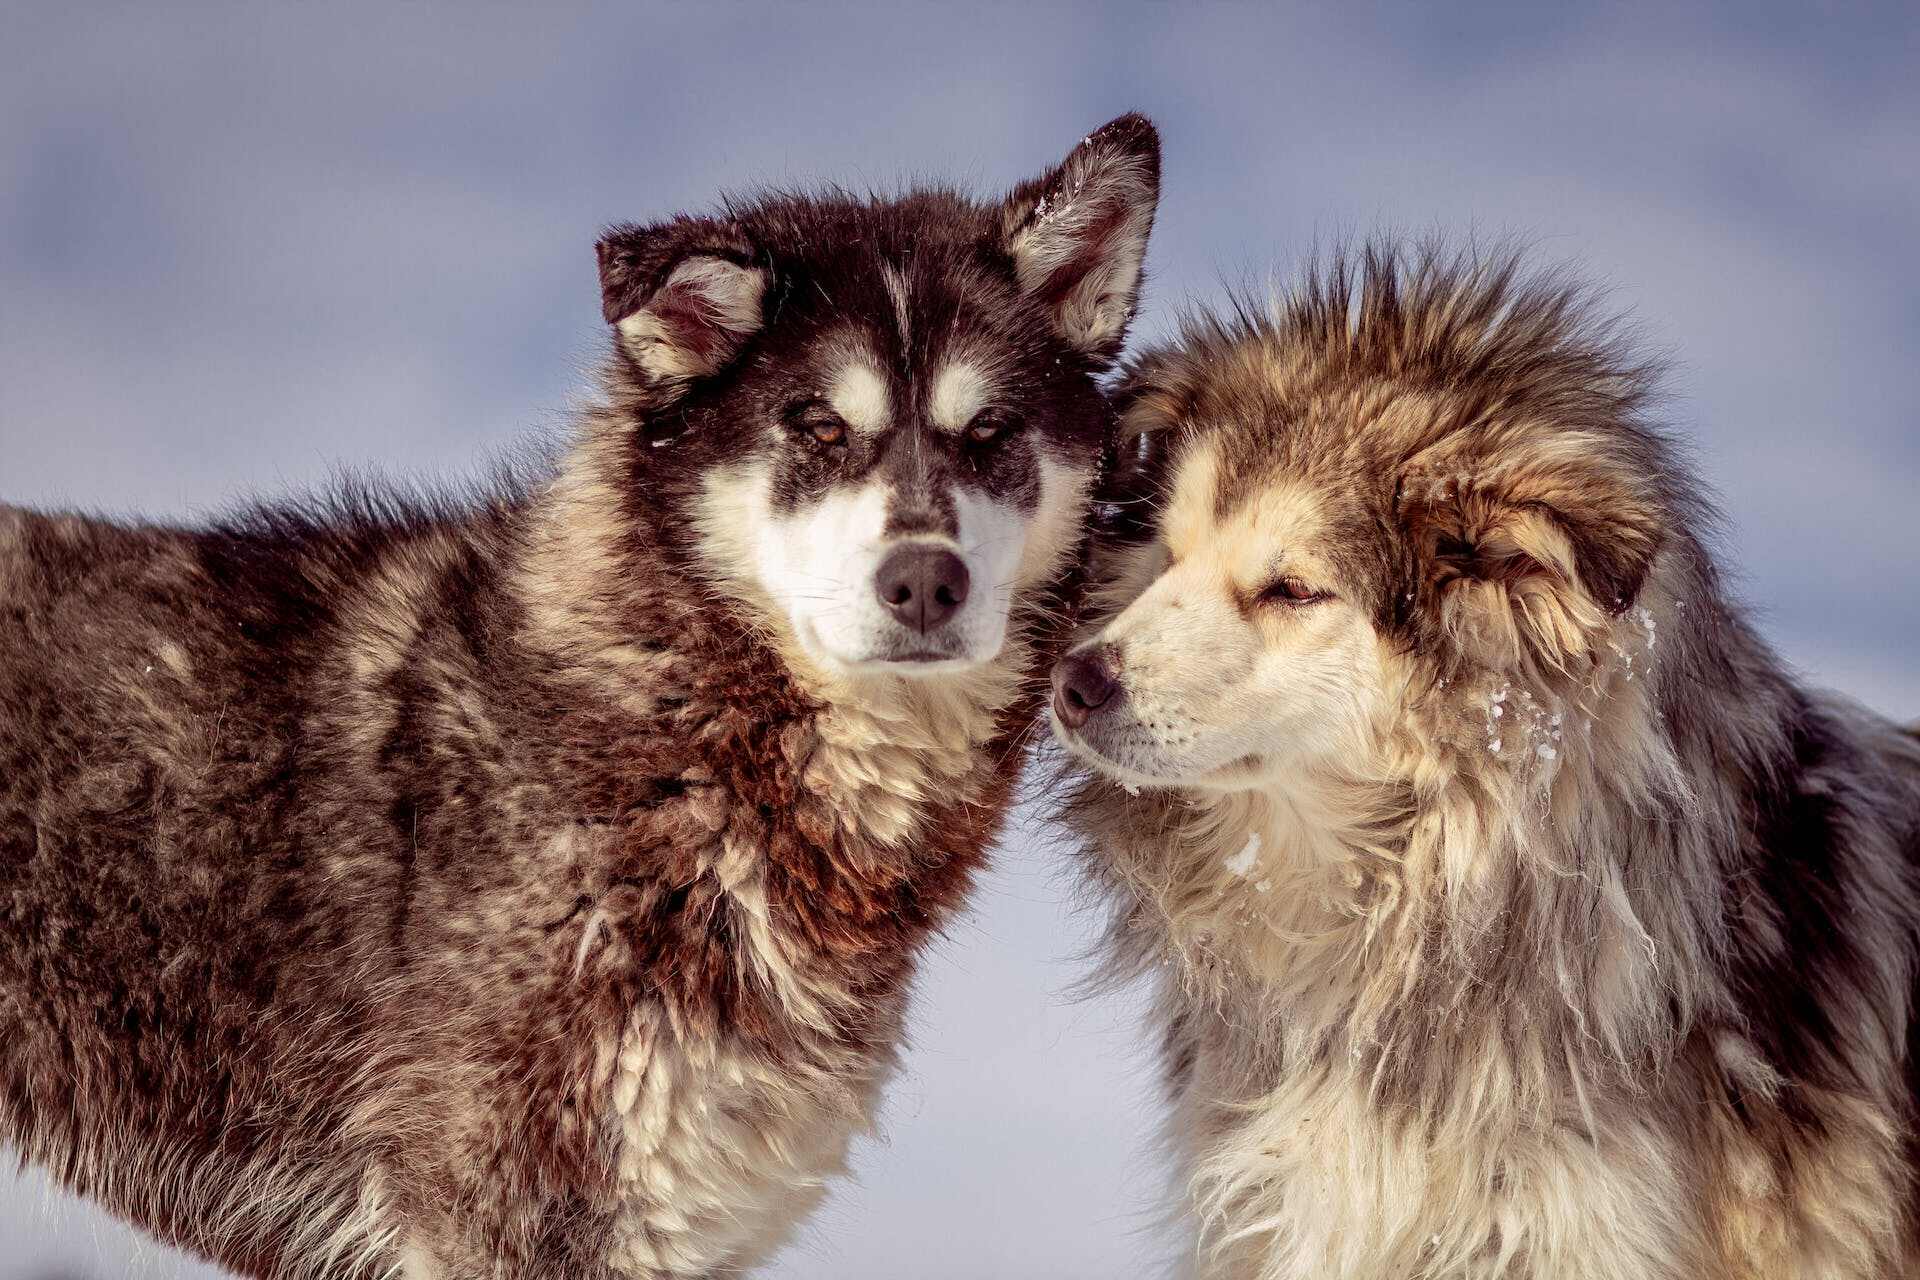 A pair of Alaskan Malamutes in the snow